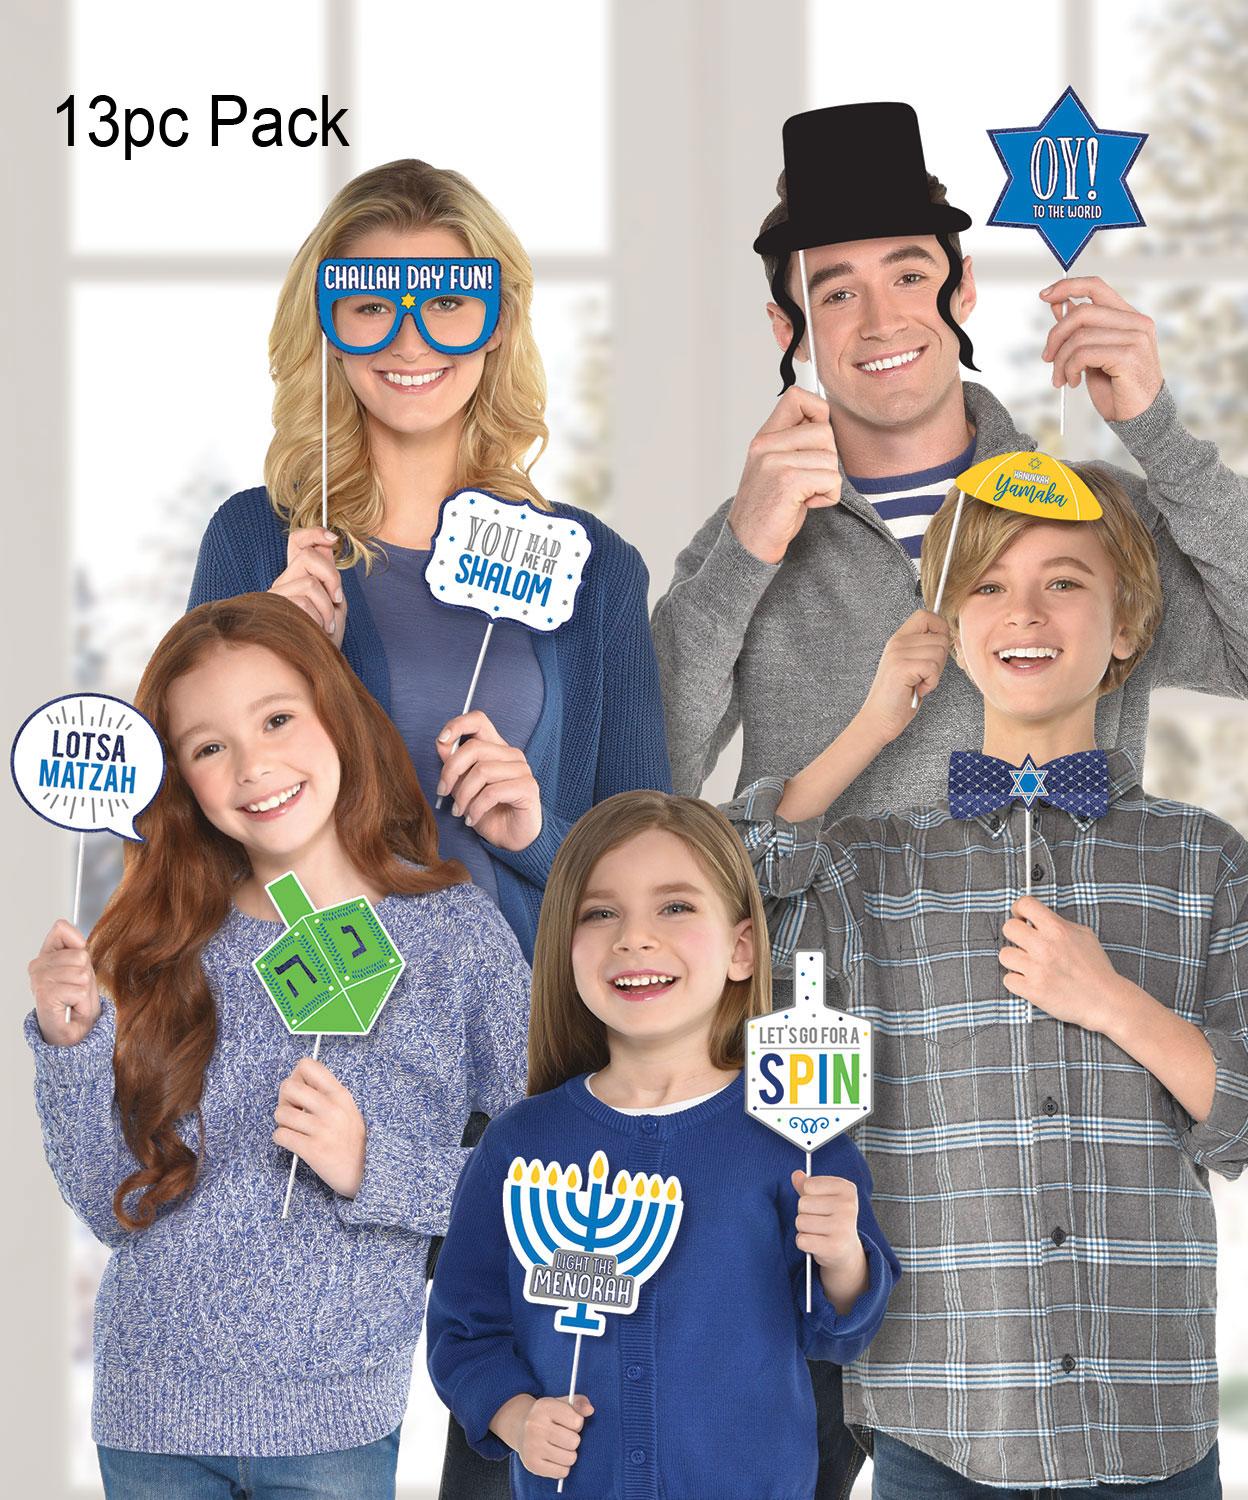 Hanukkah Photo Prop Kit 13pce by Amscan 3900412 available here at Karnival Costumes online party shop